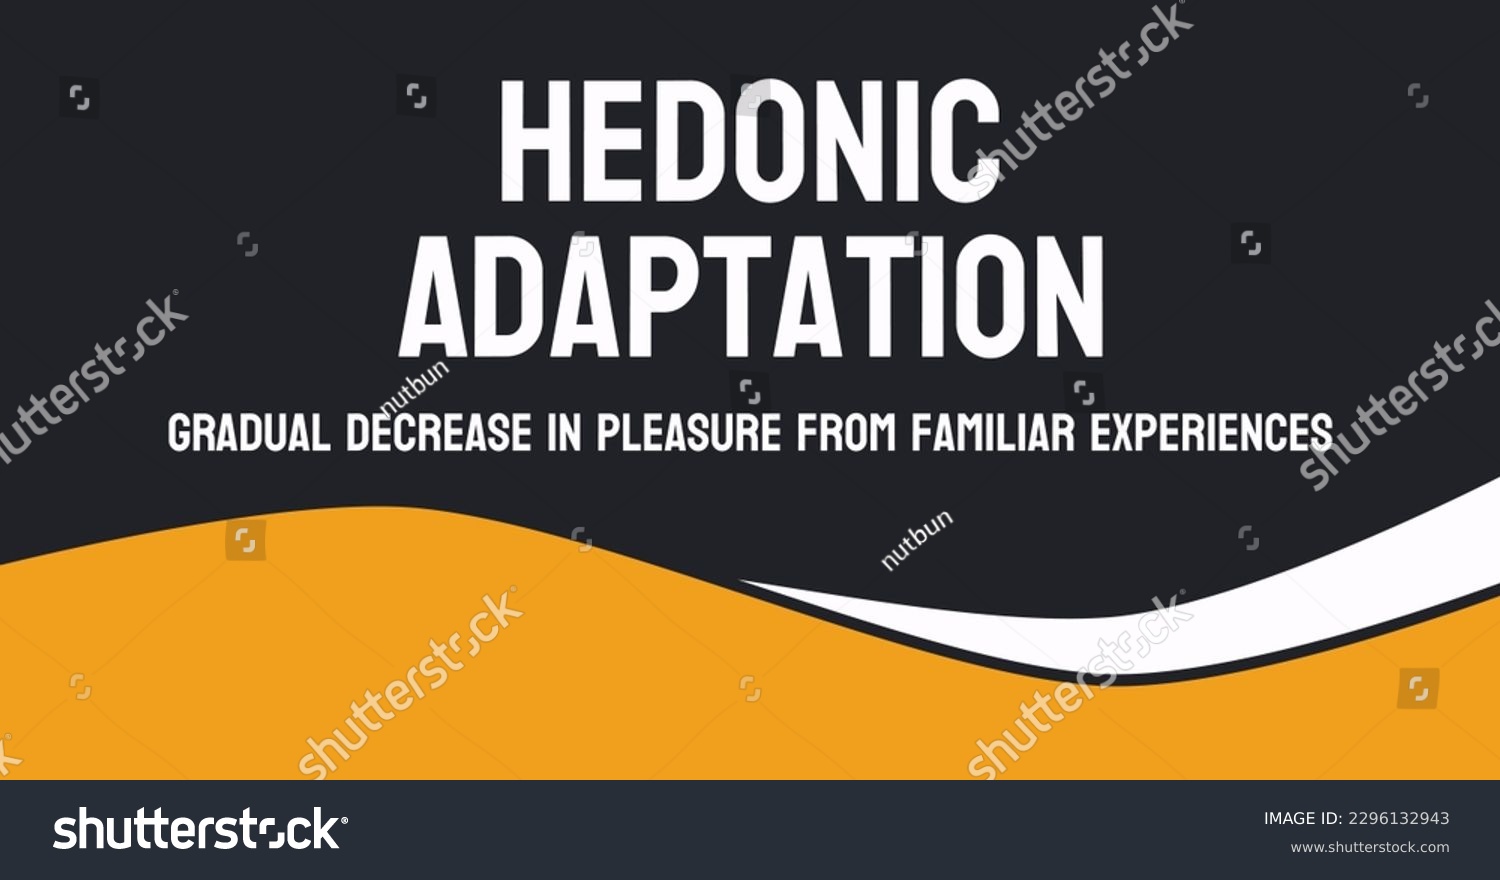 SVG of Hedonic Adaptation - The tendency to adapt to positive or negative changes in life. svg